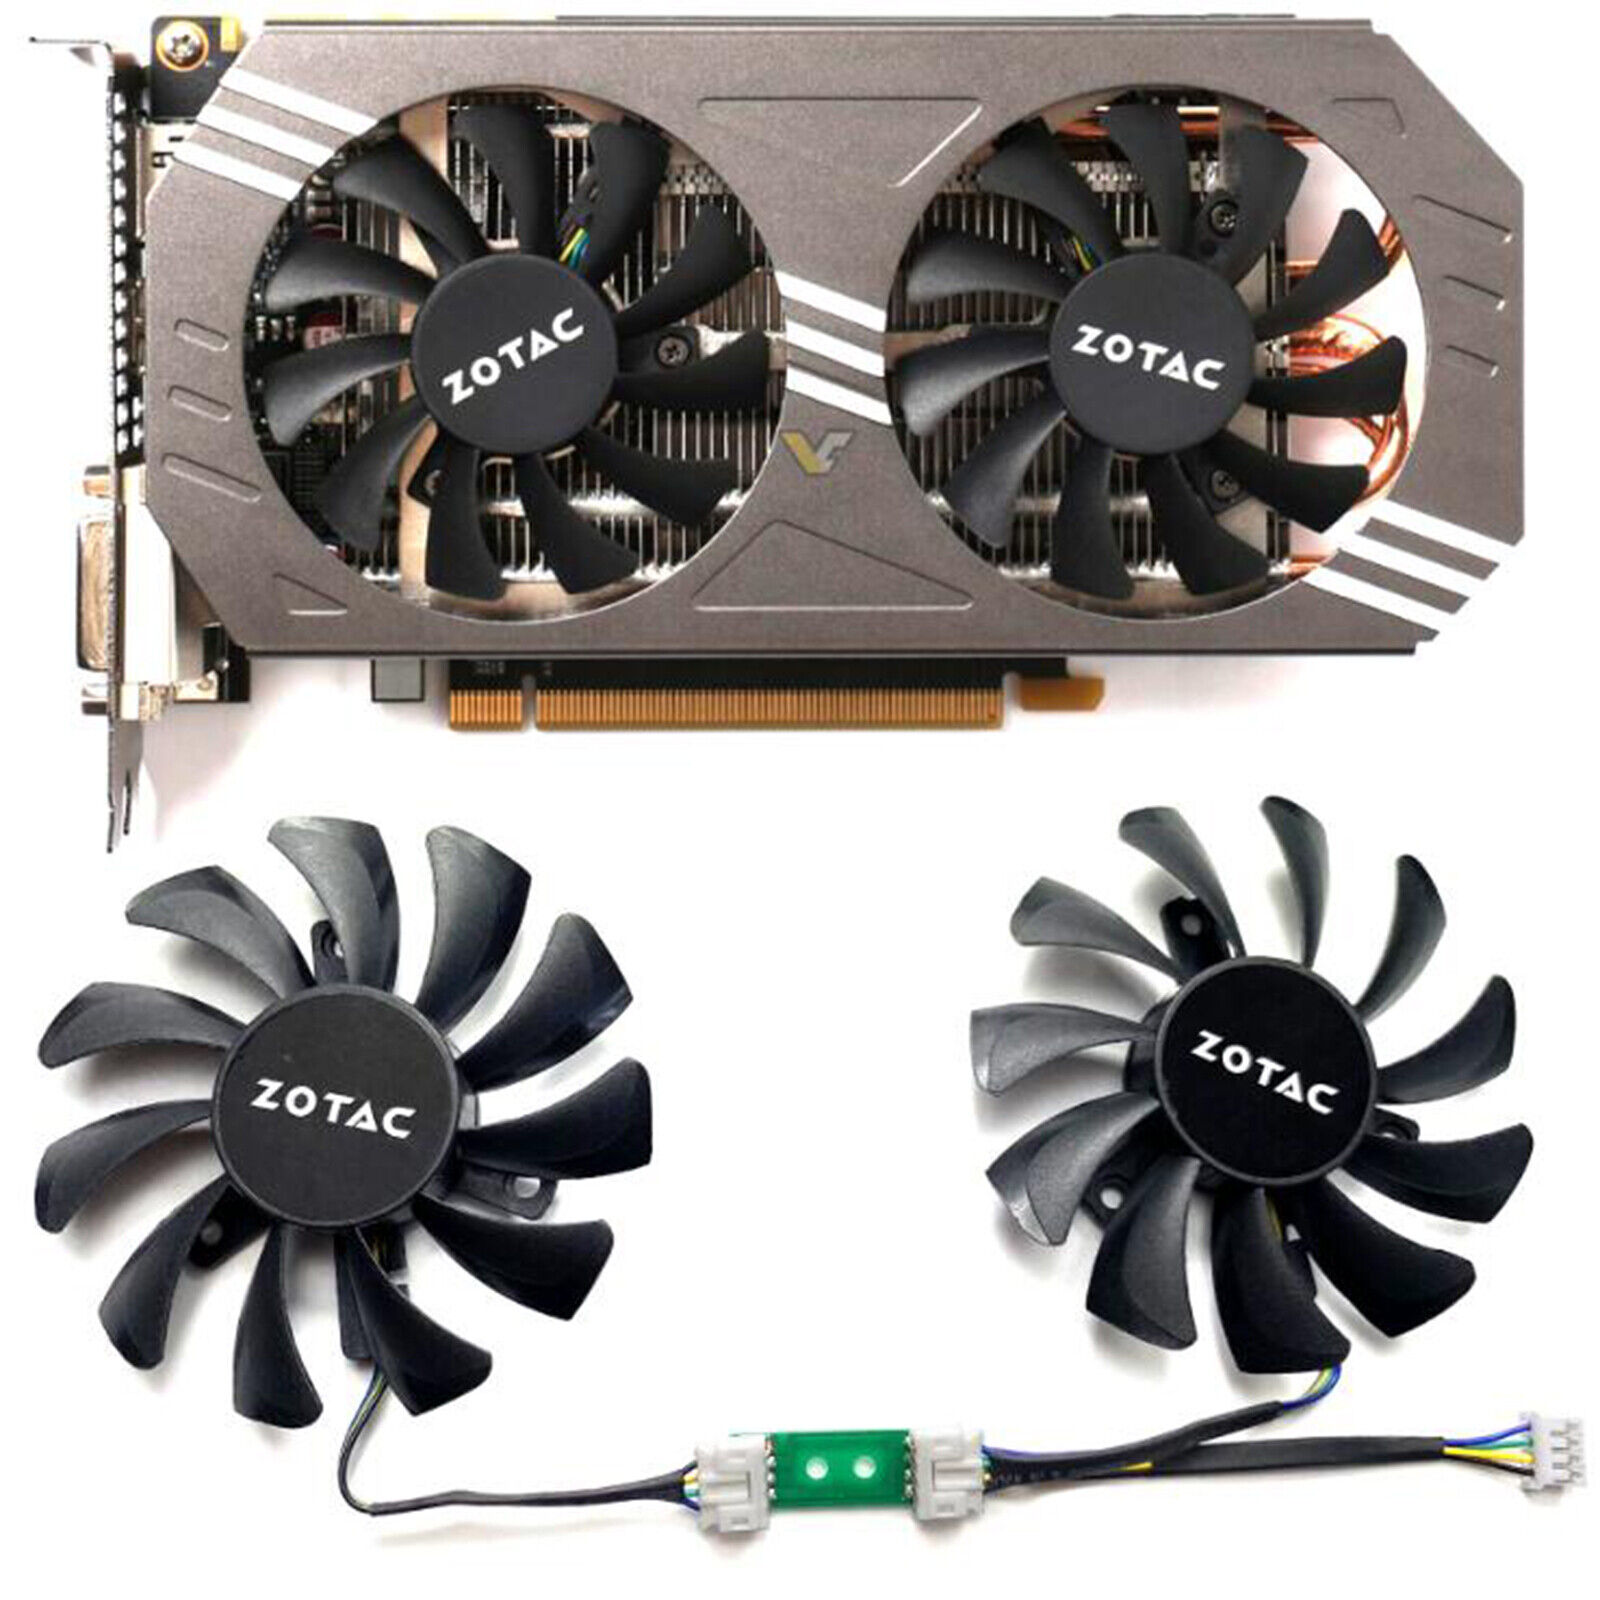 Replacement Cooling Fans for ZOTAC GeForce GTX 970 4GB Graphics Card #JCH